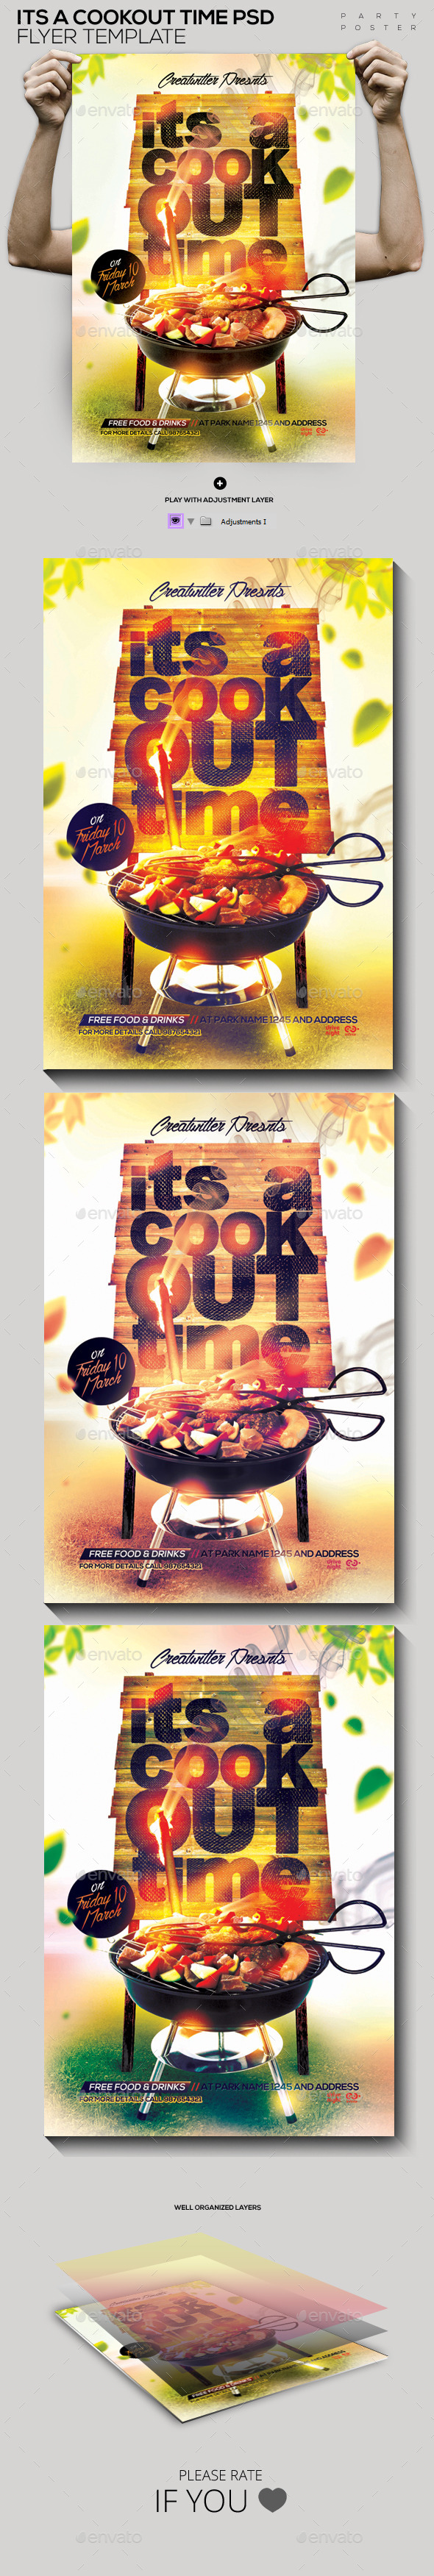 free cookout flyer template psd